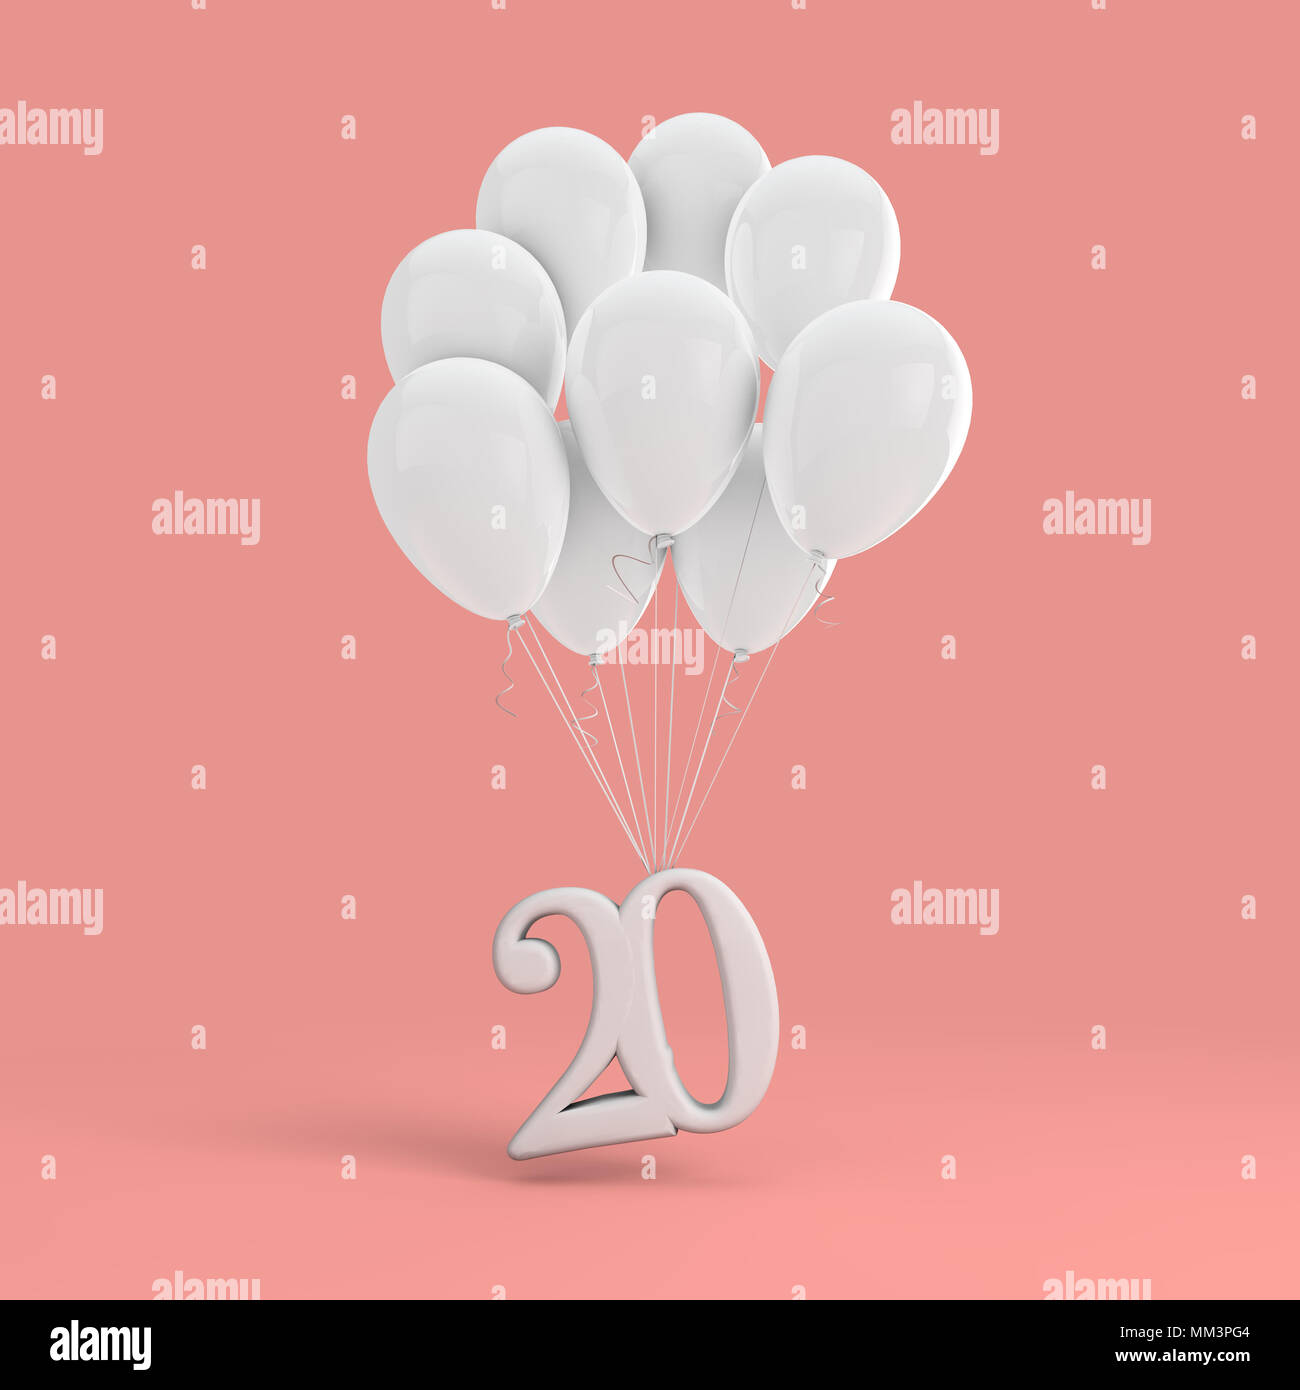 Number 20 party celebration. Number attached to a bunch of white balloons Stock Photo